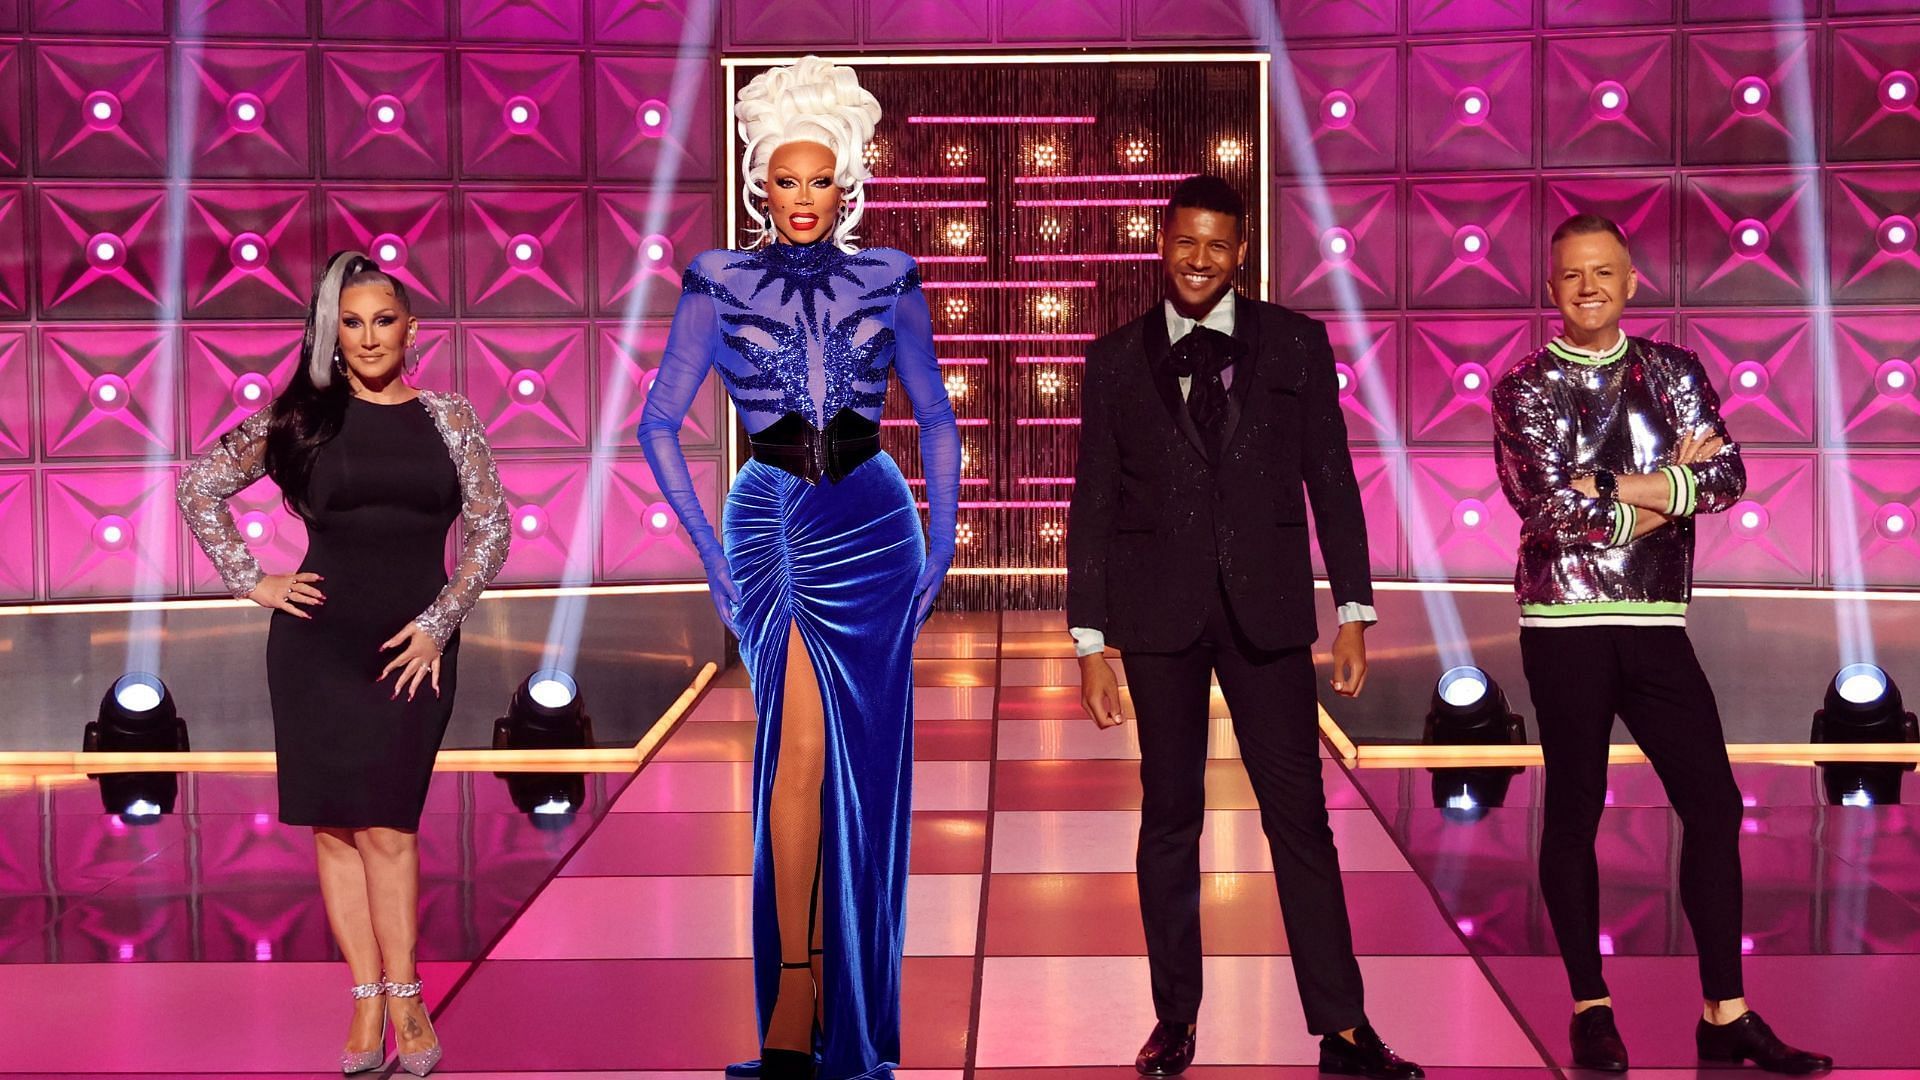 The popular show gets 11 Emmy nominations in 2022 (Image via @RuPaulsDragRace/Twitter)